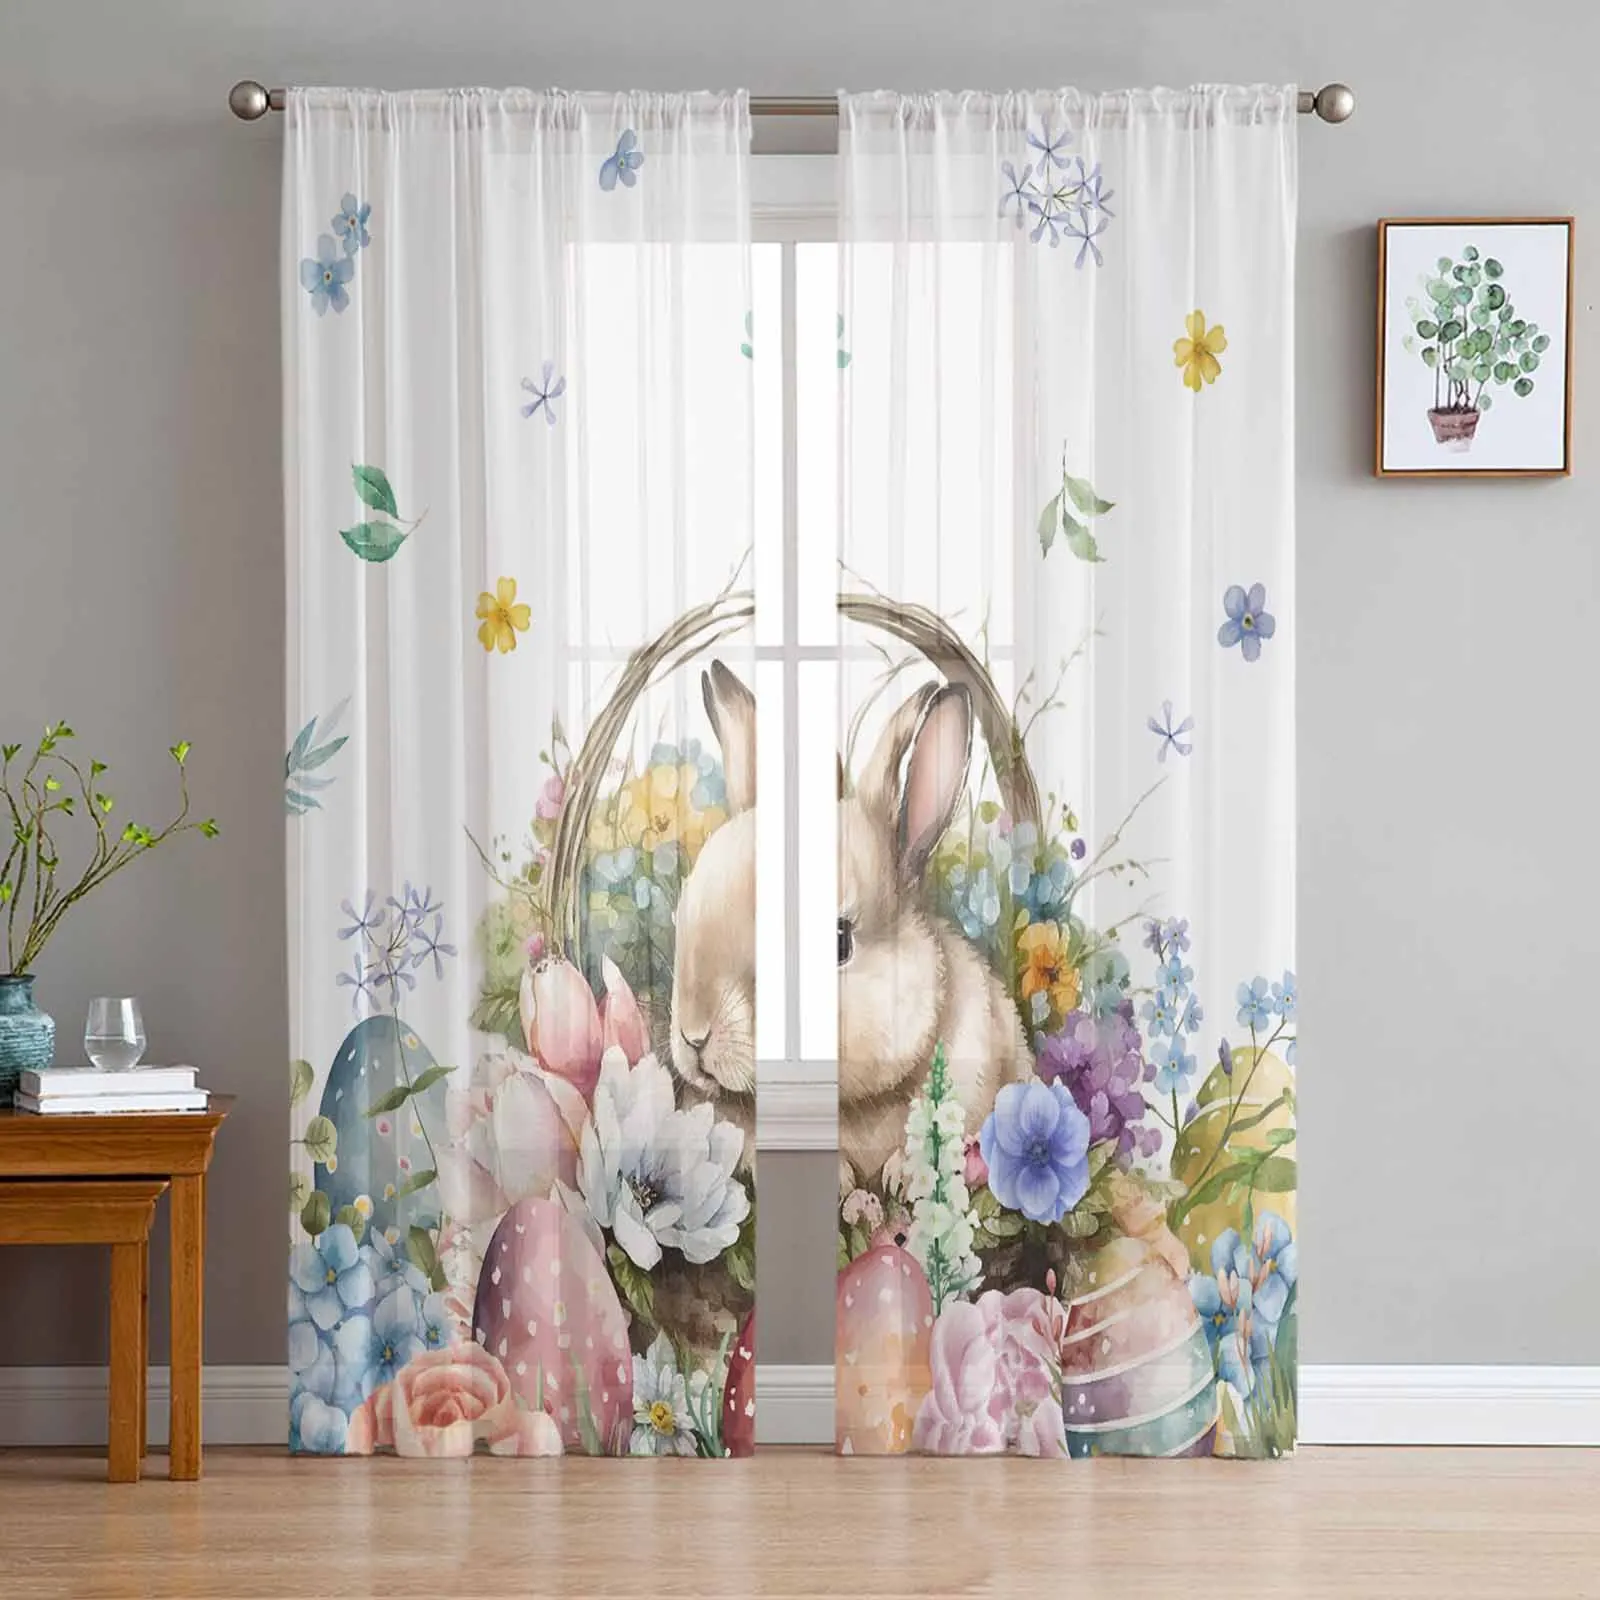 

Easter Egg Bunny Watercolor Sheer Curtains for Bedroom Living Room Decoration Window Curtain Kitchen Tulle Voile Organza Drapes